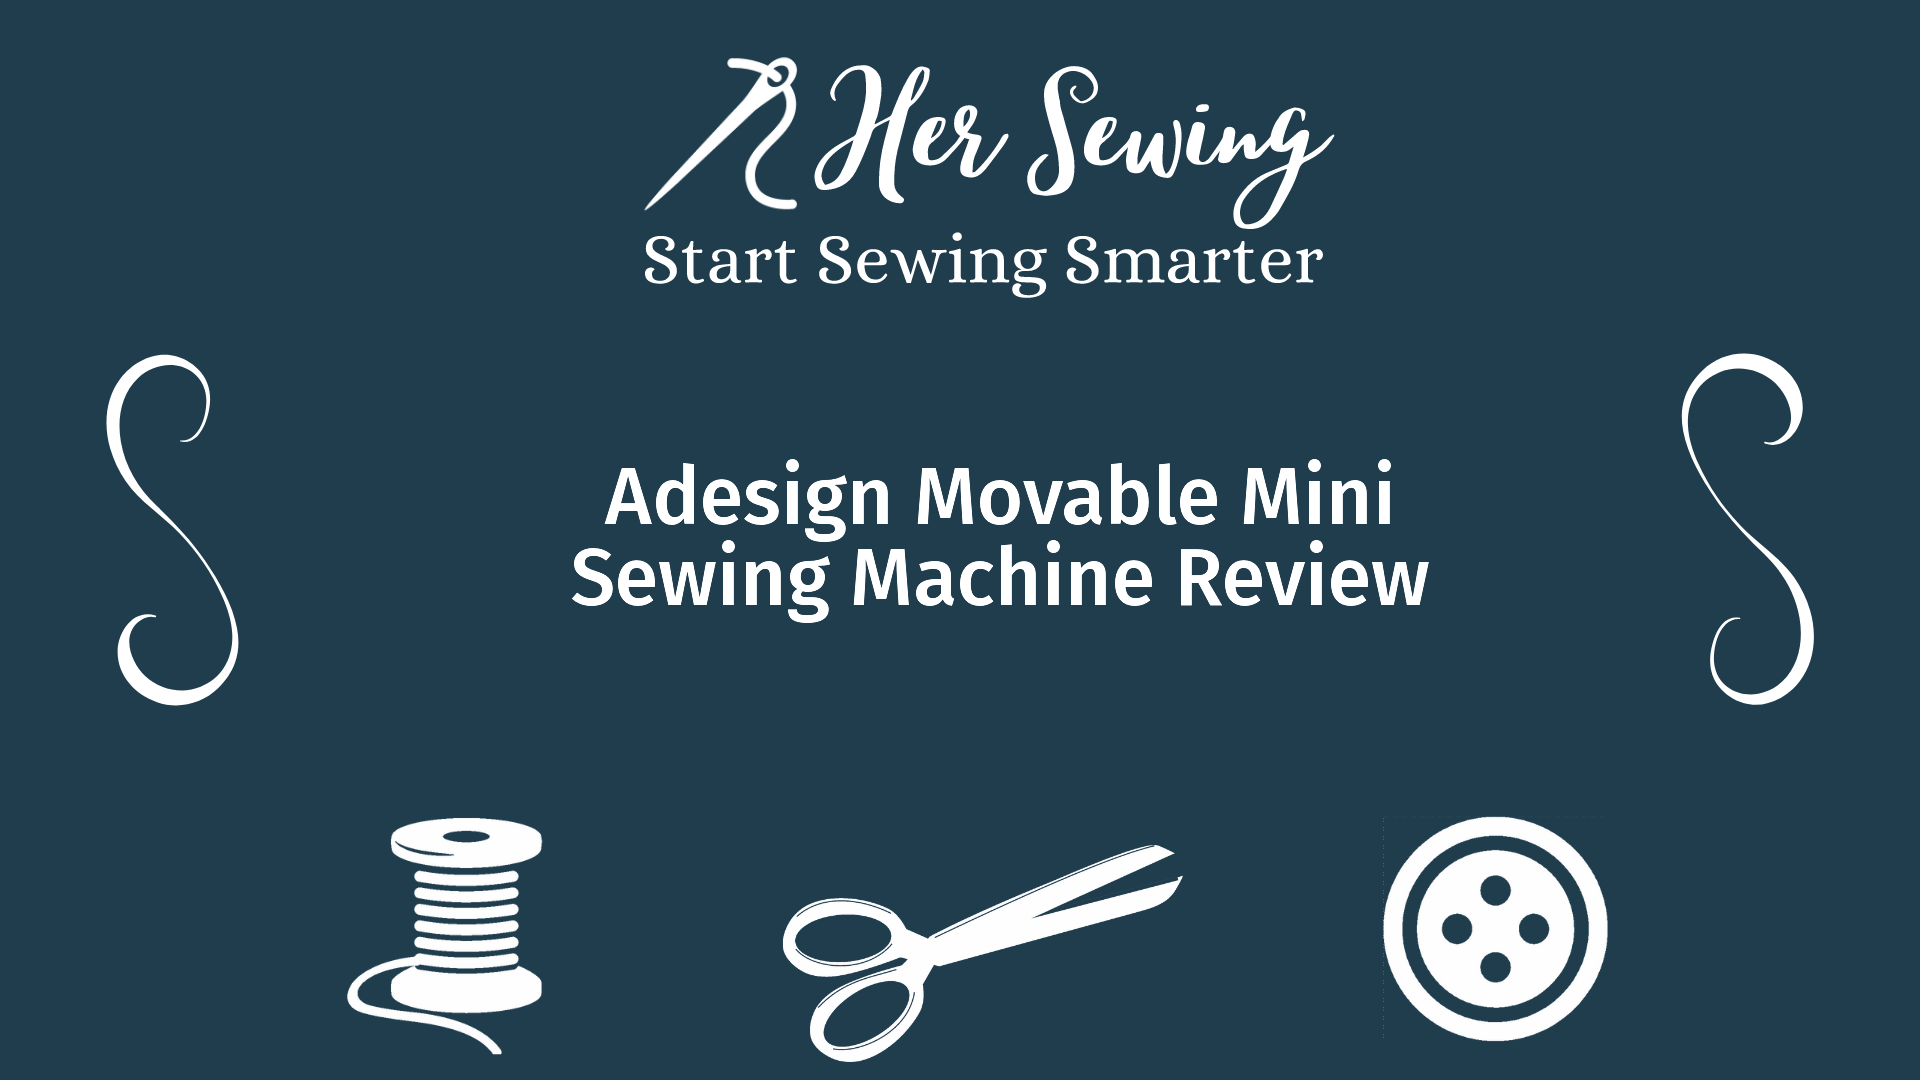 Adesign Movable Mini Sewing Machine Review